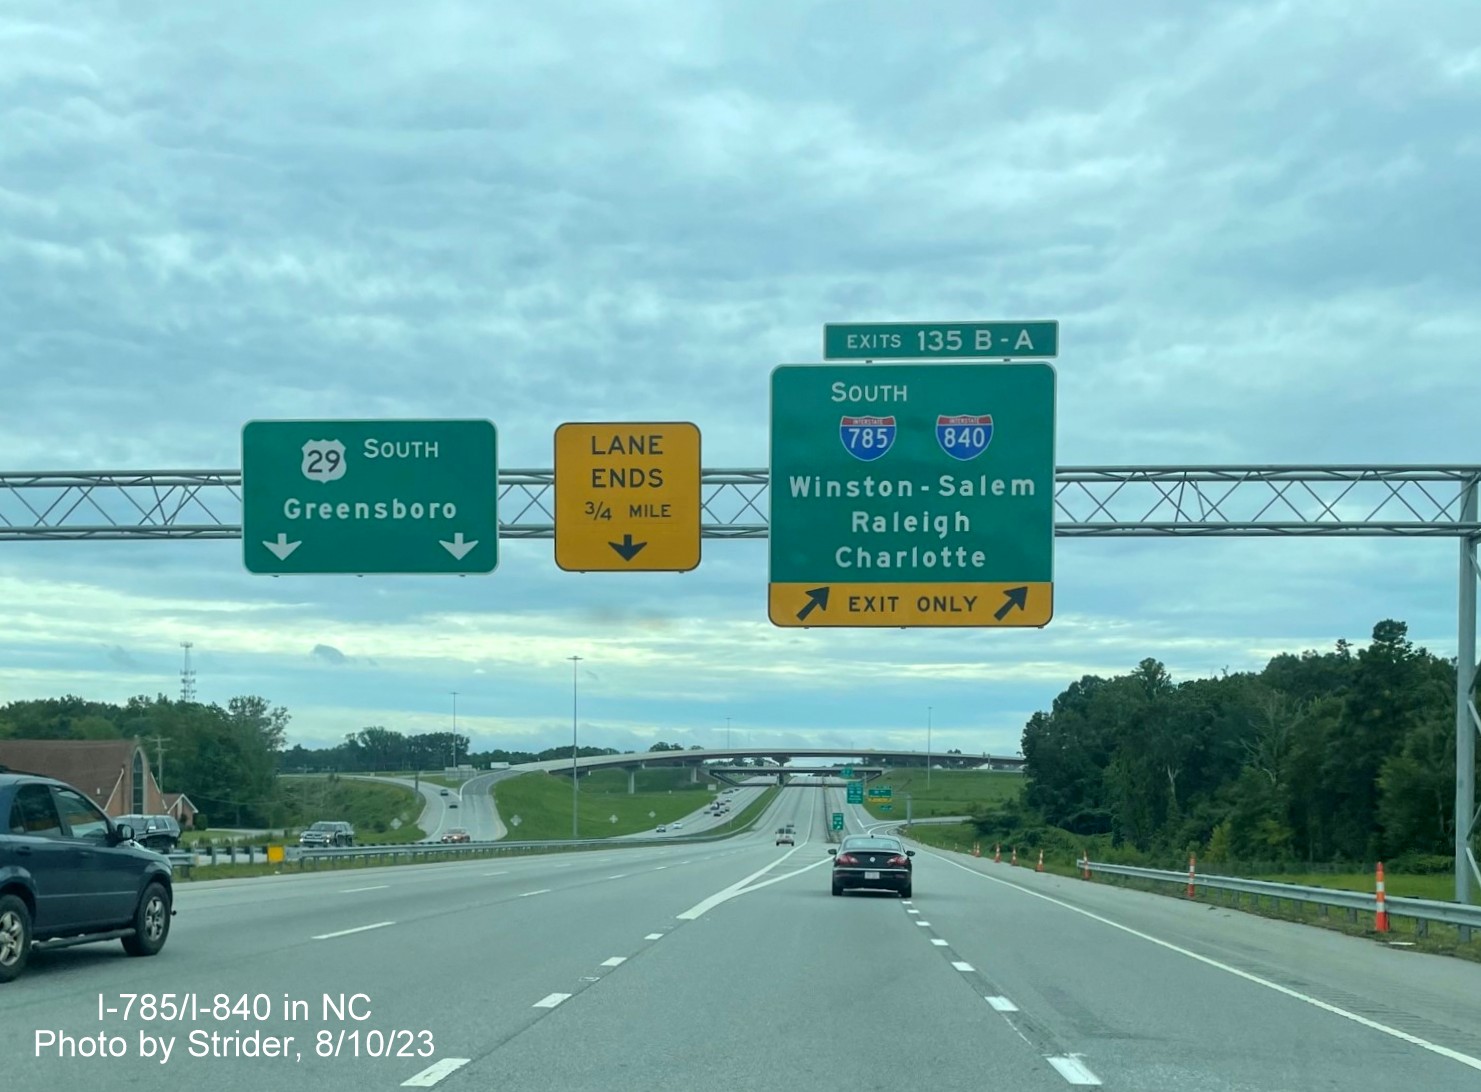 Image of 1 mile advance overhead sign for Greensboro Loop exits, now with added I-840 West sign after Loop's completion on US 29 South, Strider, August 2023